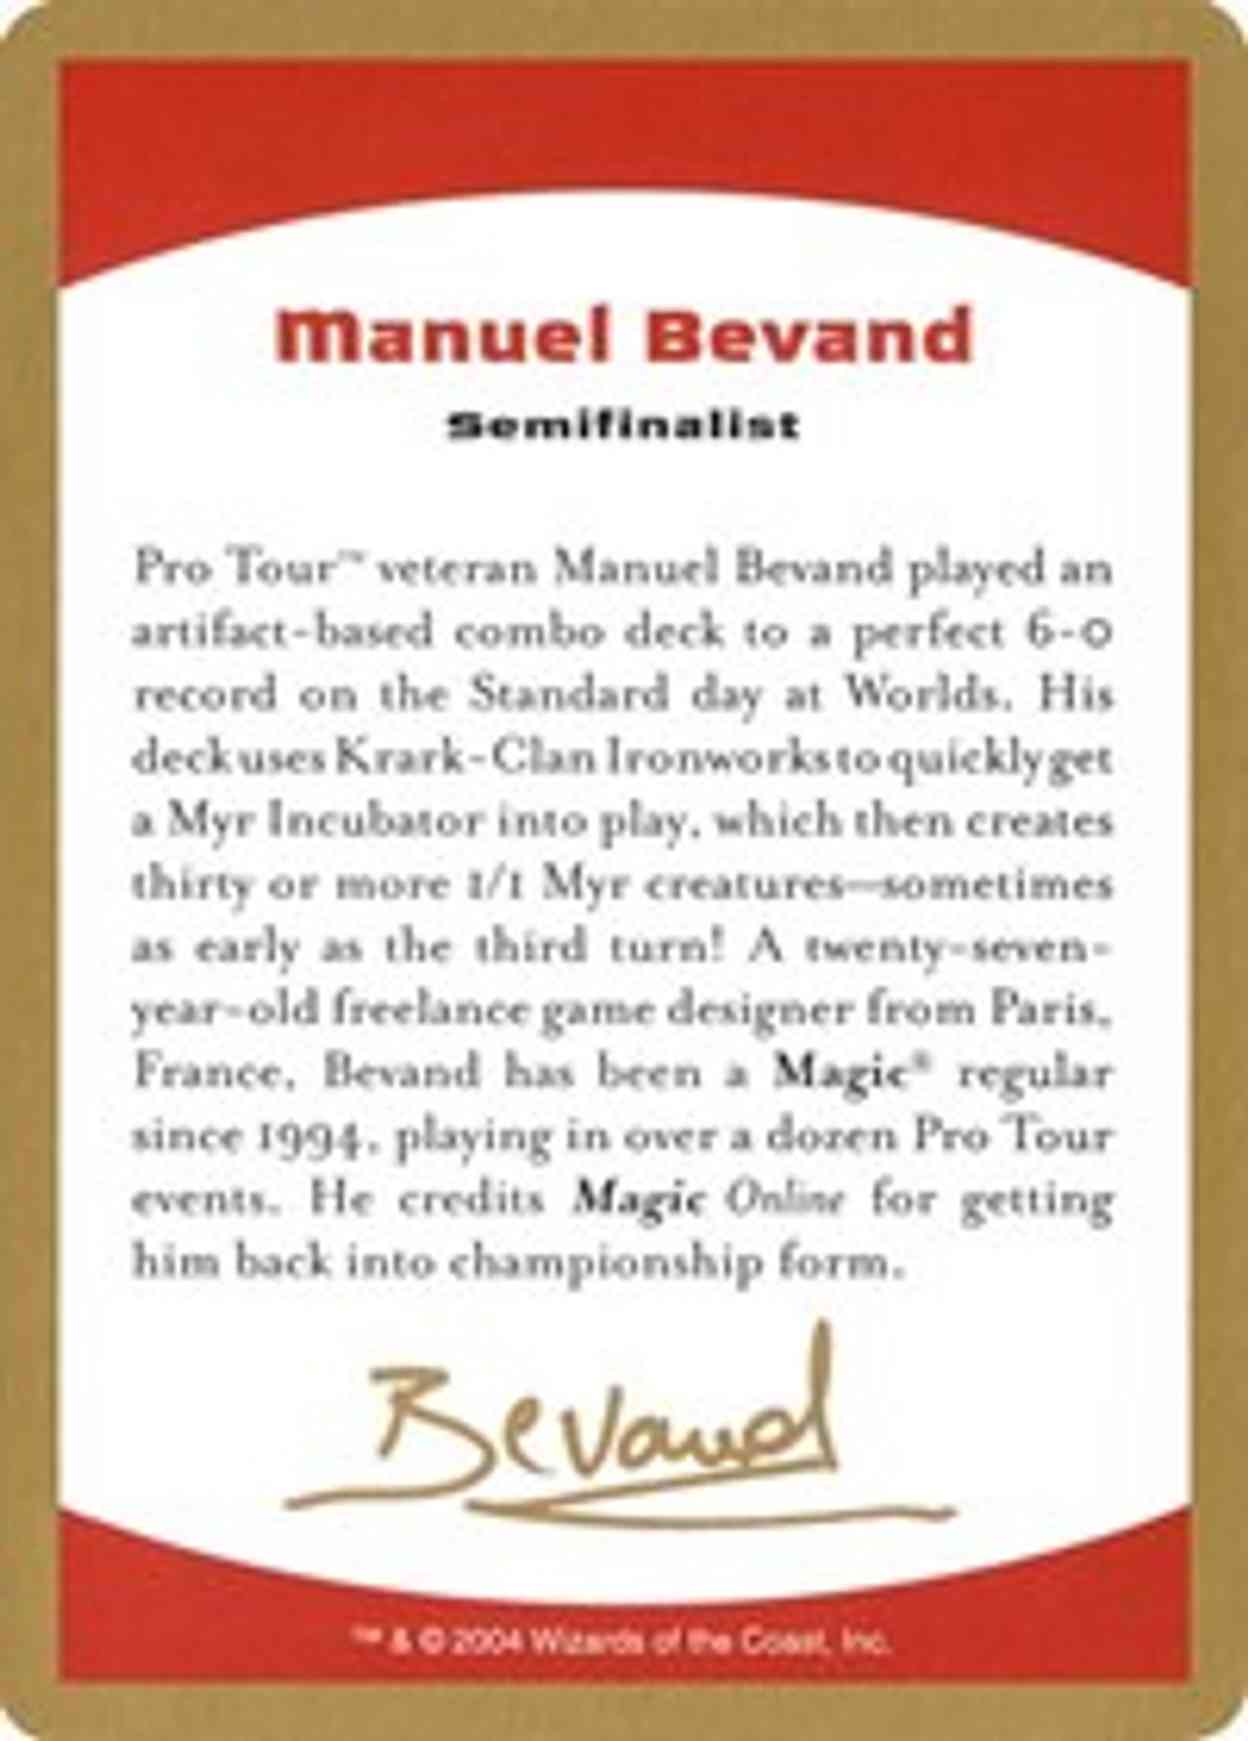 2004 Manuel Bevand Biography Card magic card front